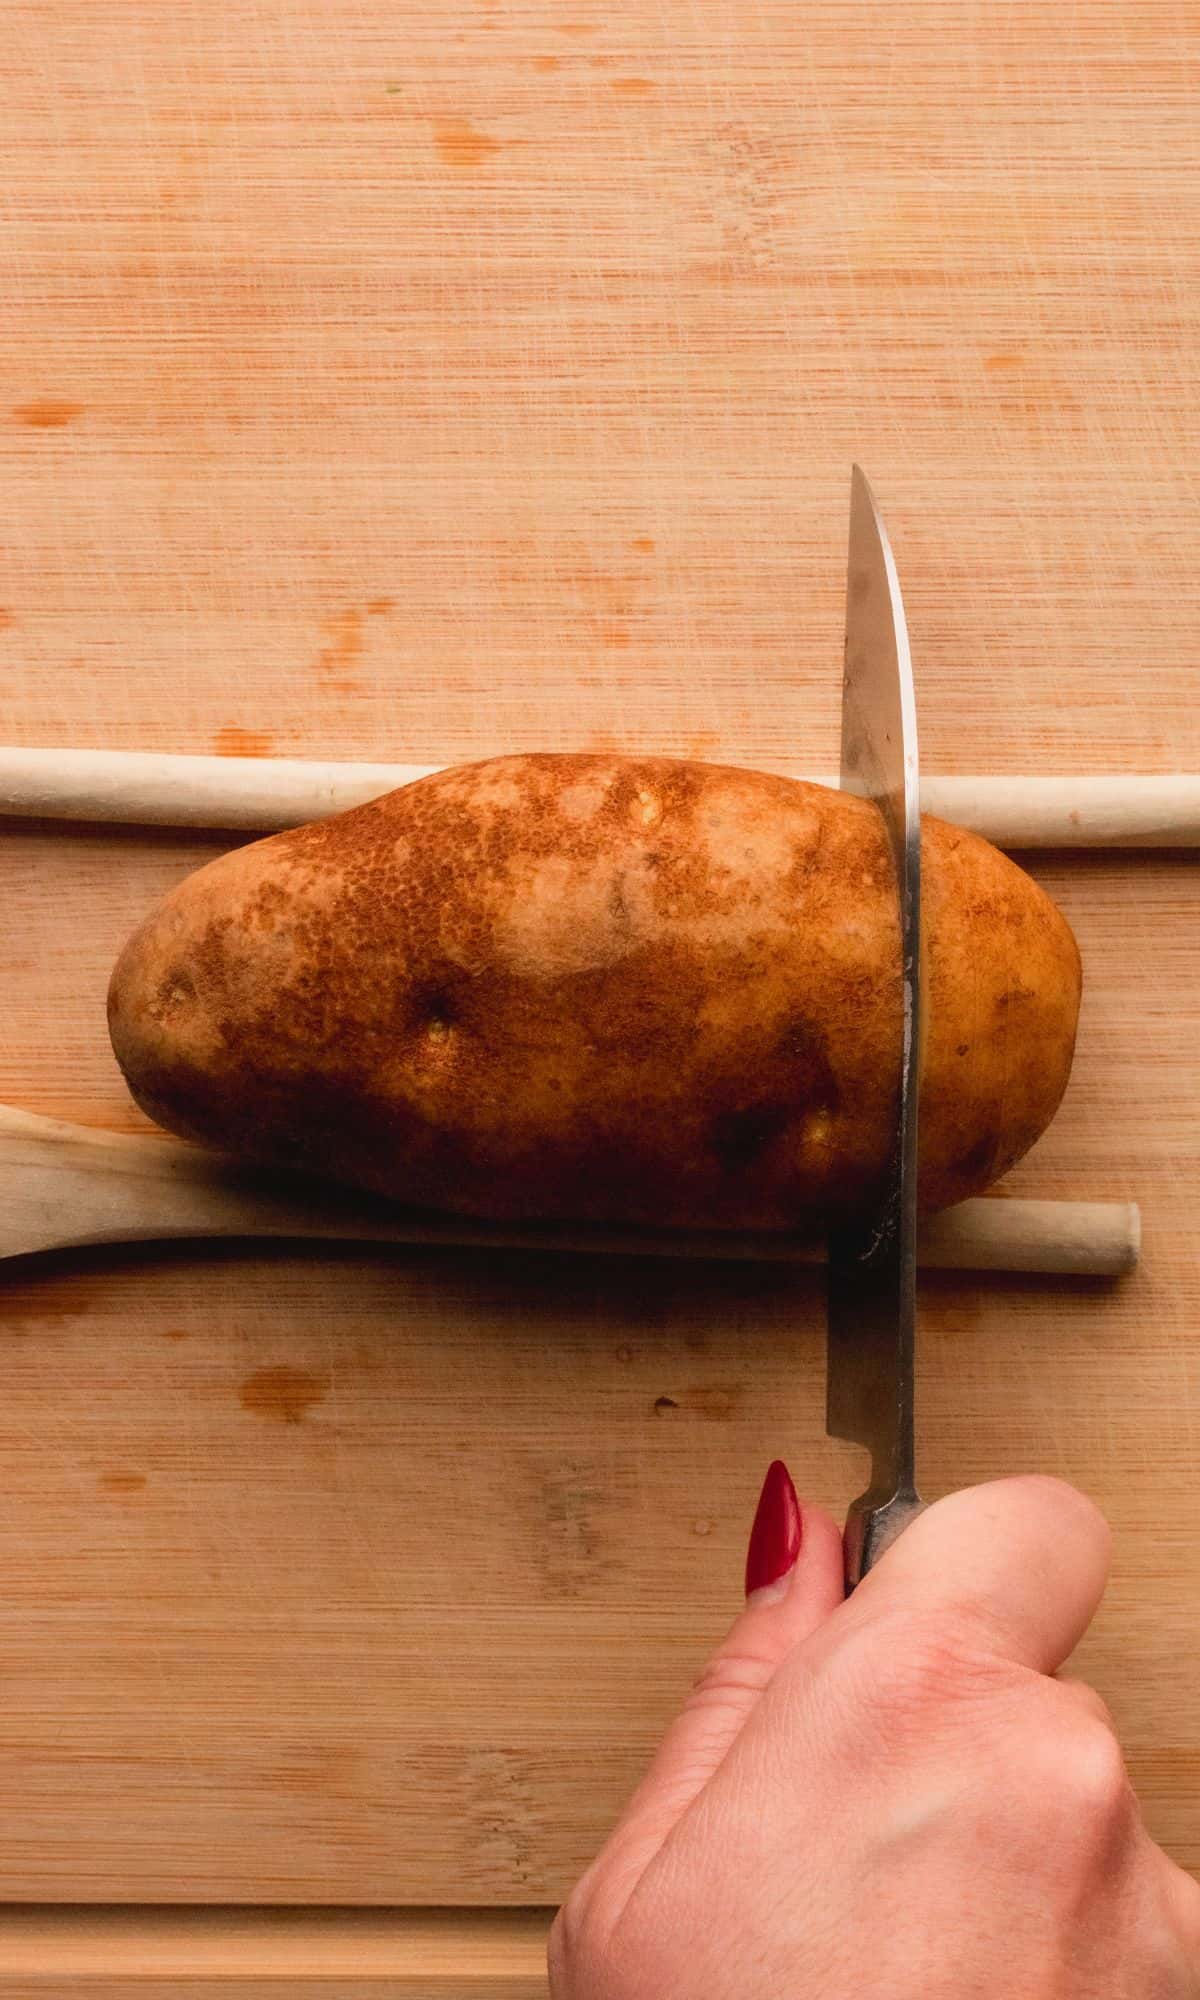 Slicing potato with wooden spoons on each side as a guide.